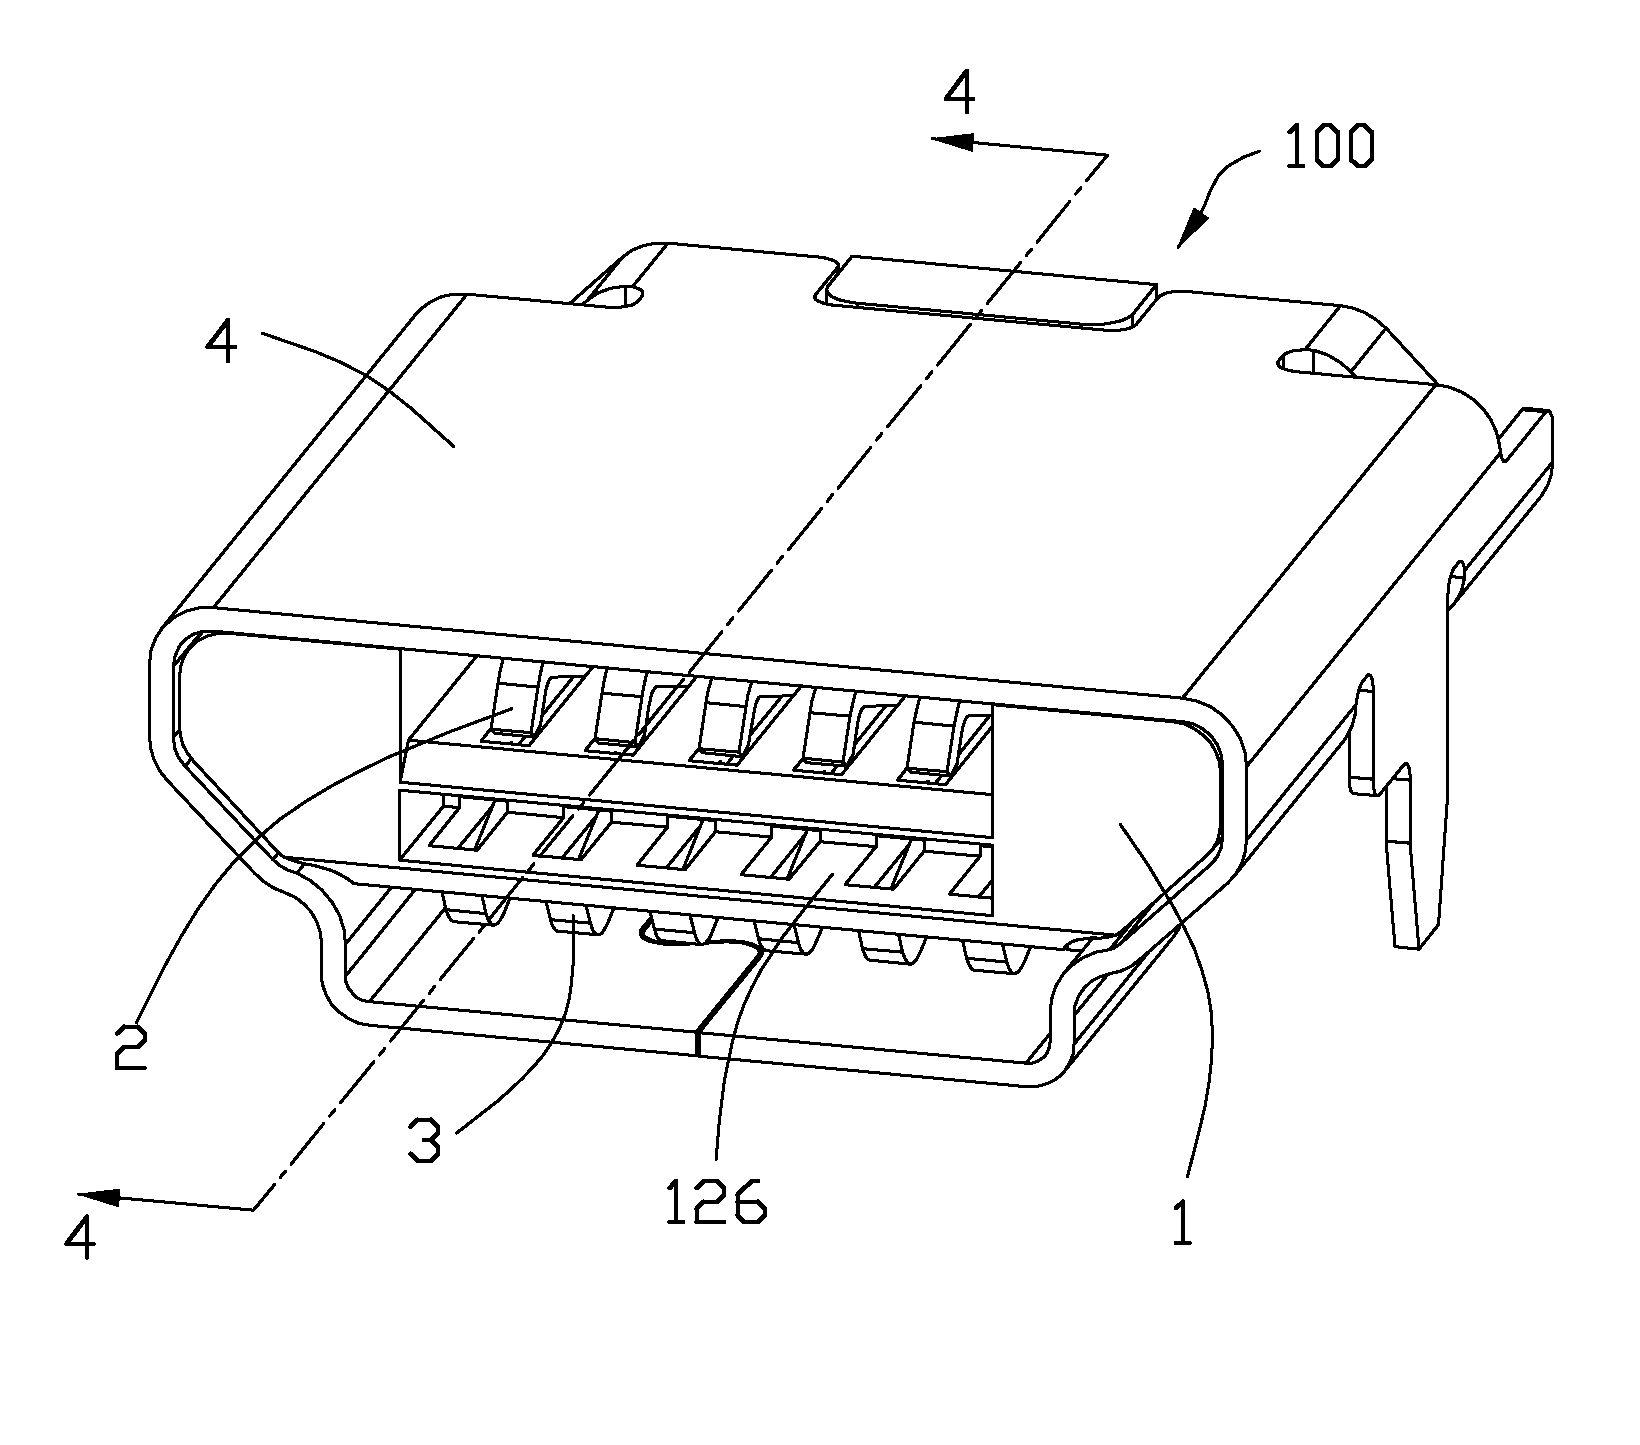 Electrical connector having improved insulative housing